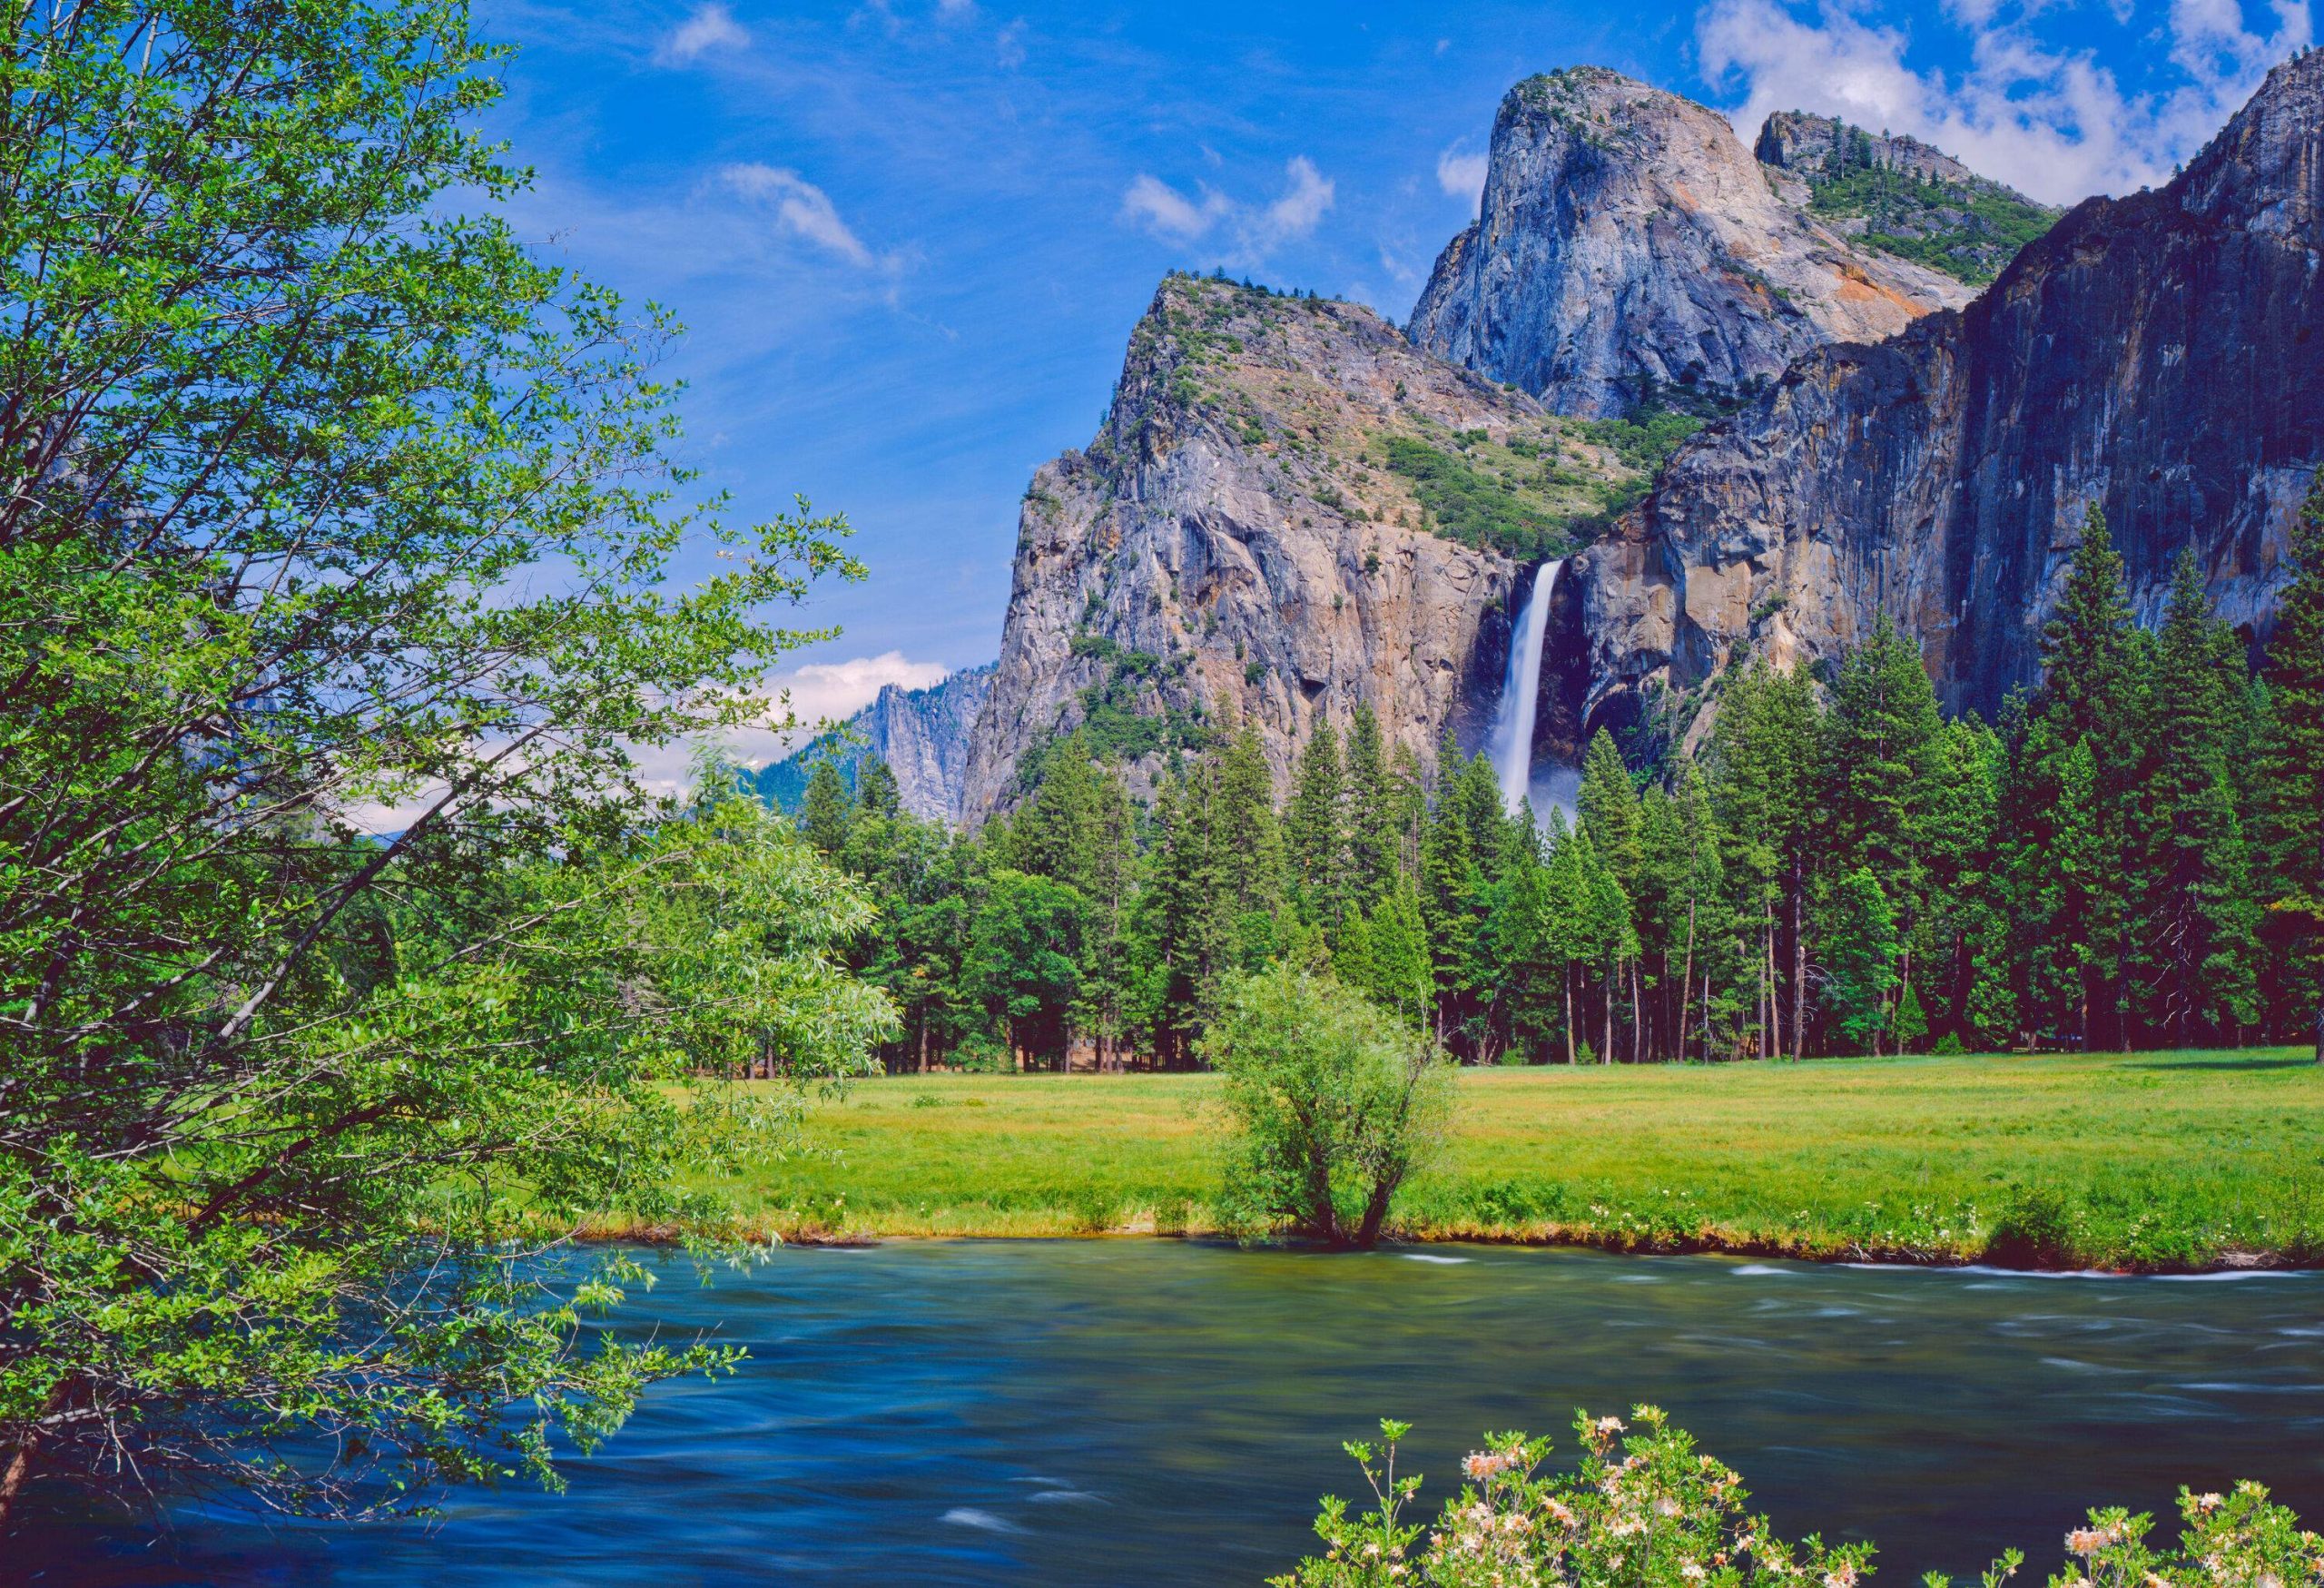 The Lower Yosemite Falls is the final drop on the steep into the lush valley span by a river.